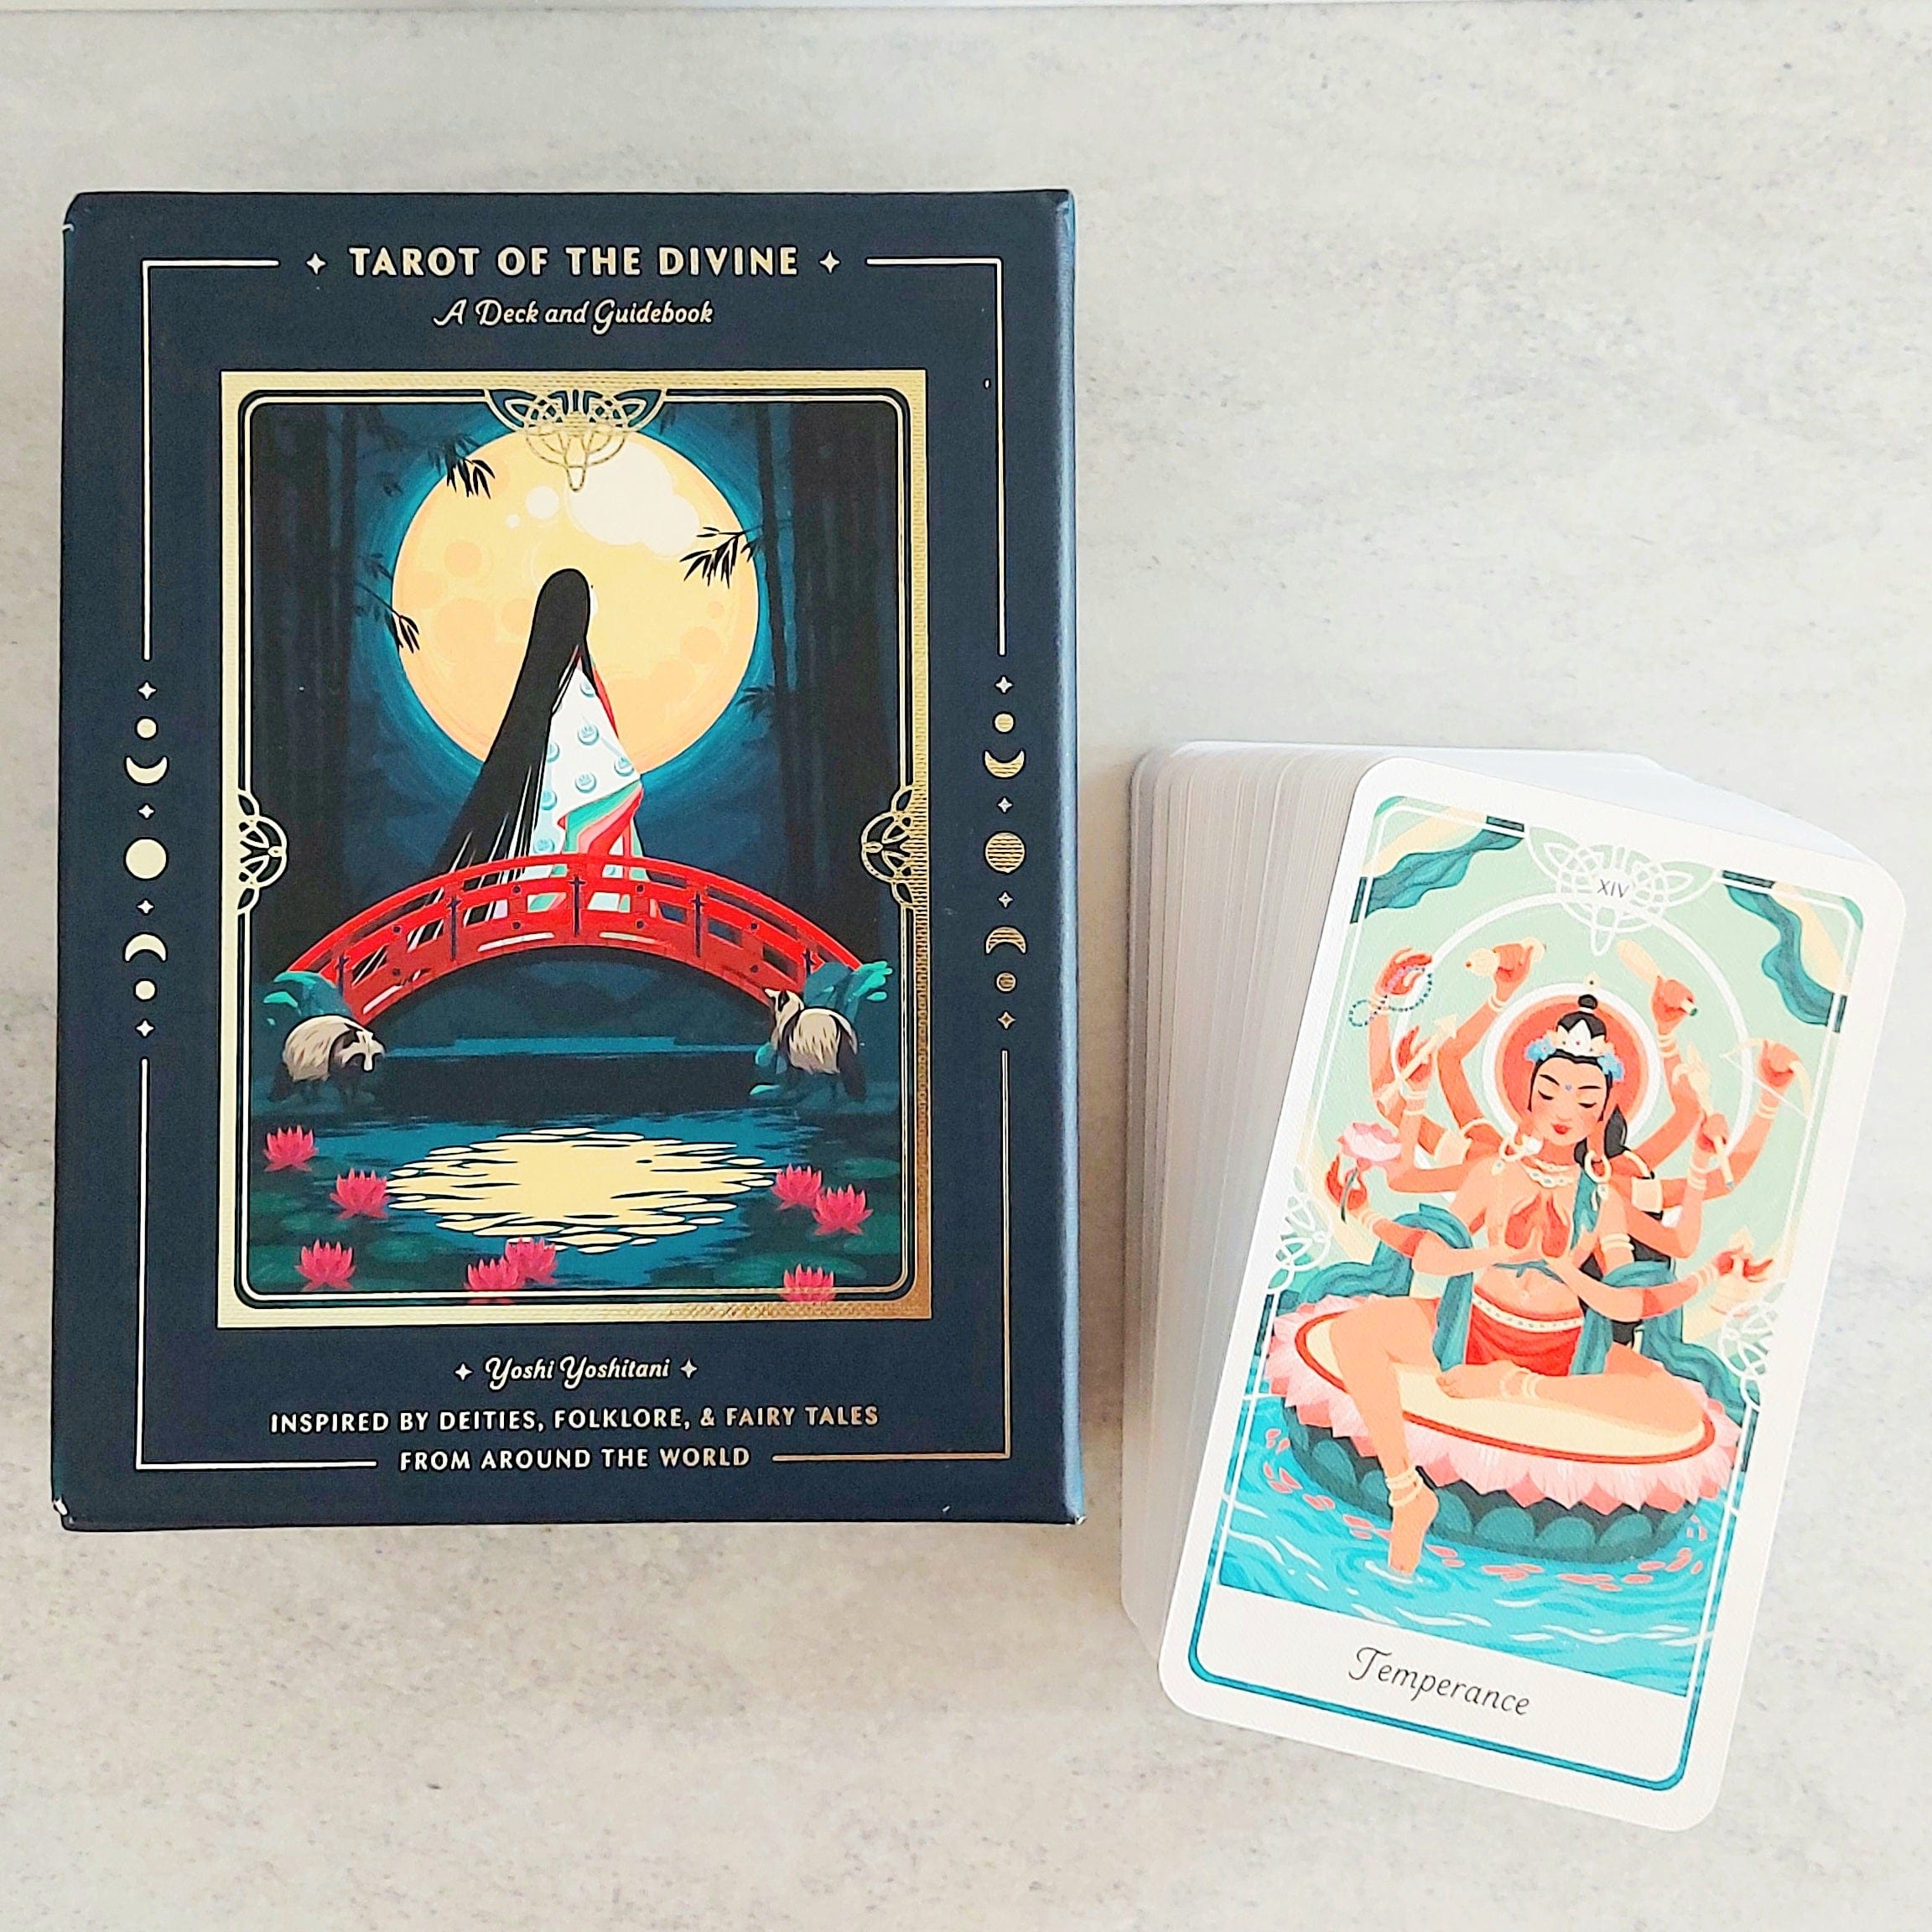 Tarot of the Divine : A Deck and Guidebook Inspired by Deities, Folklore, and Fairy Tales from Around the World: Tarot Cards by Yoshi Yoshitani • Epilogue Books Chocolate Brews